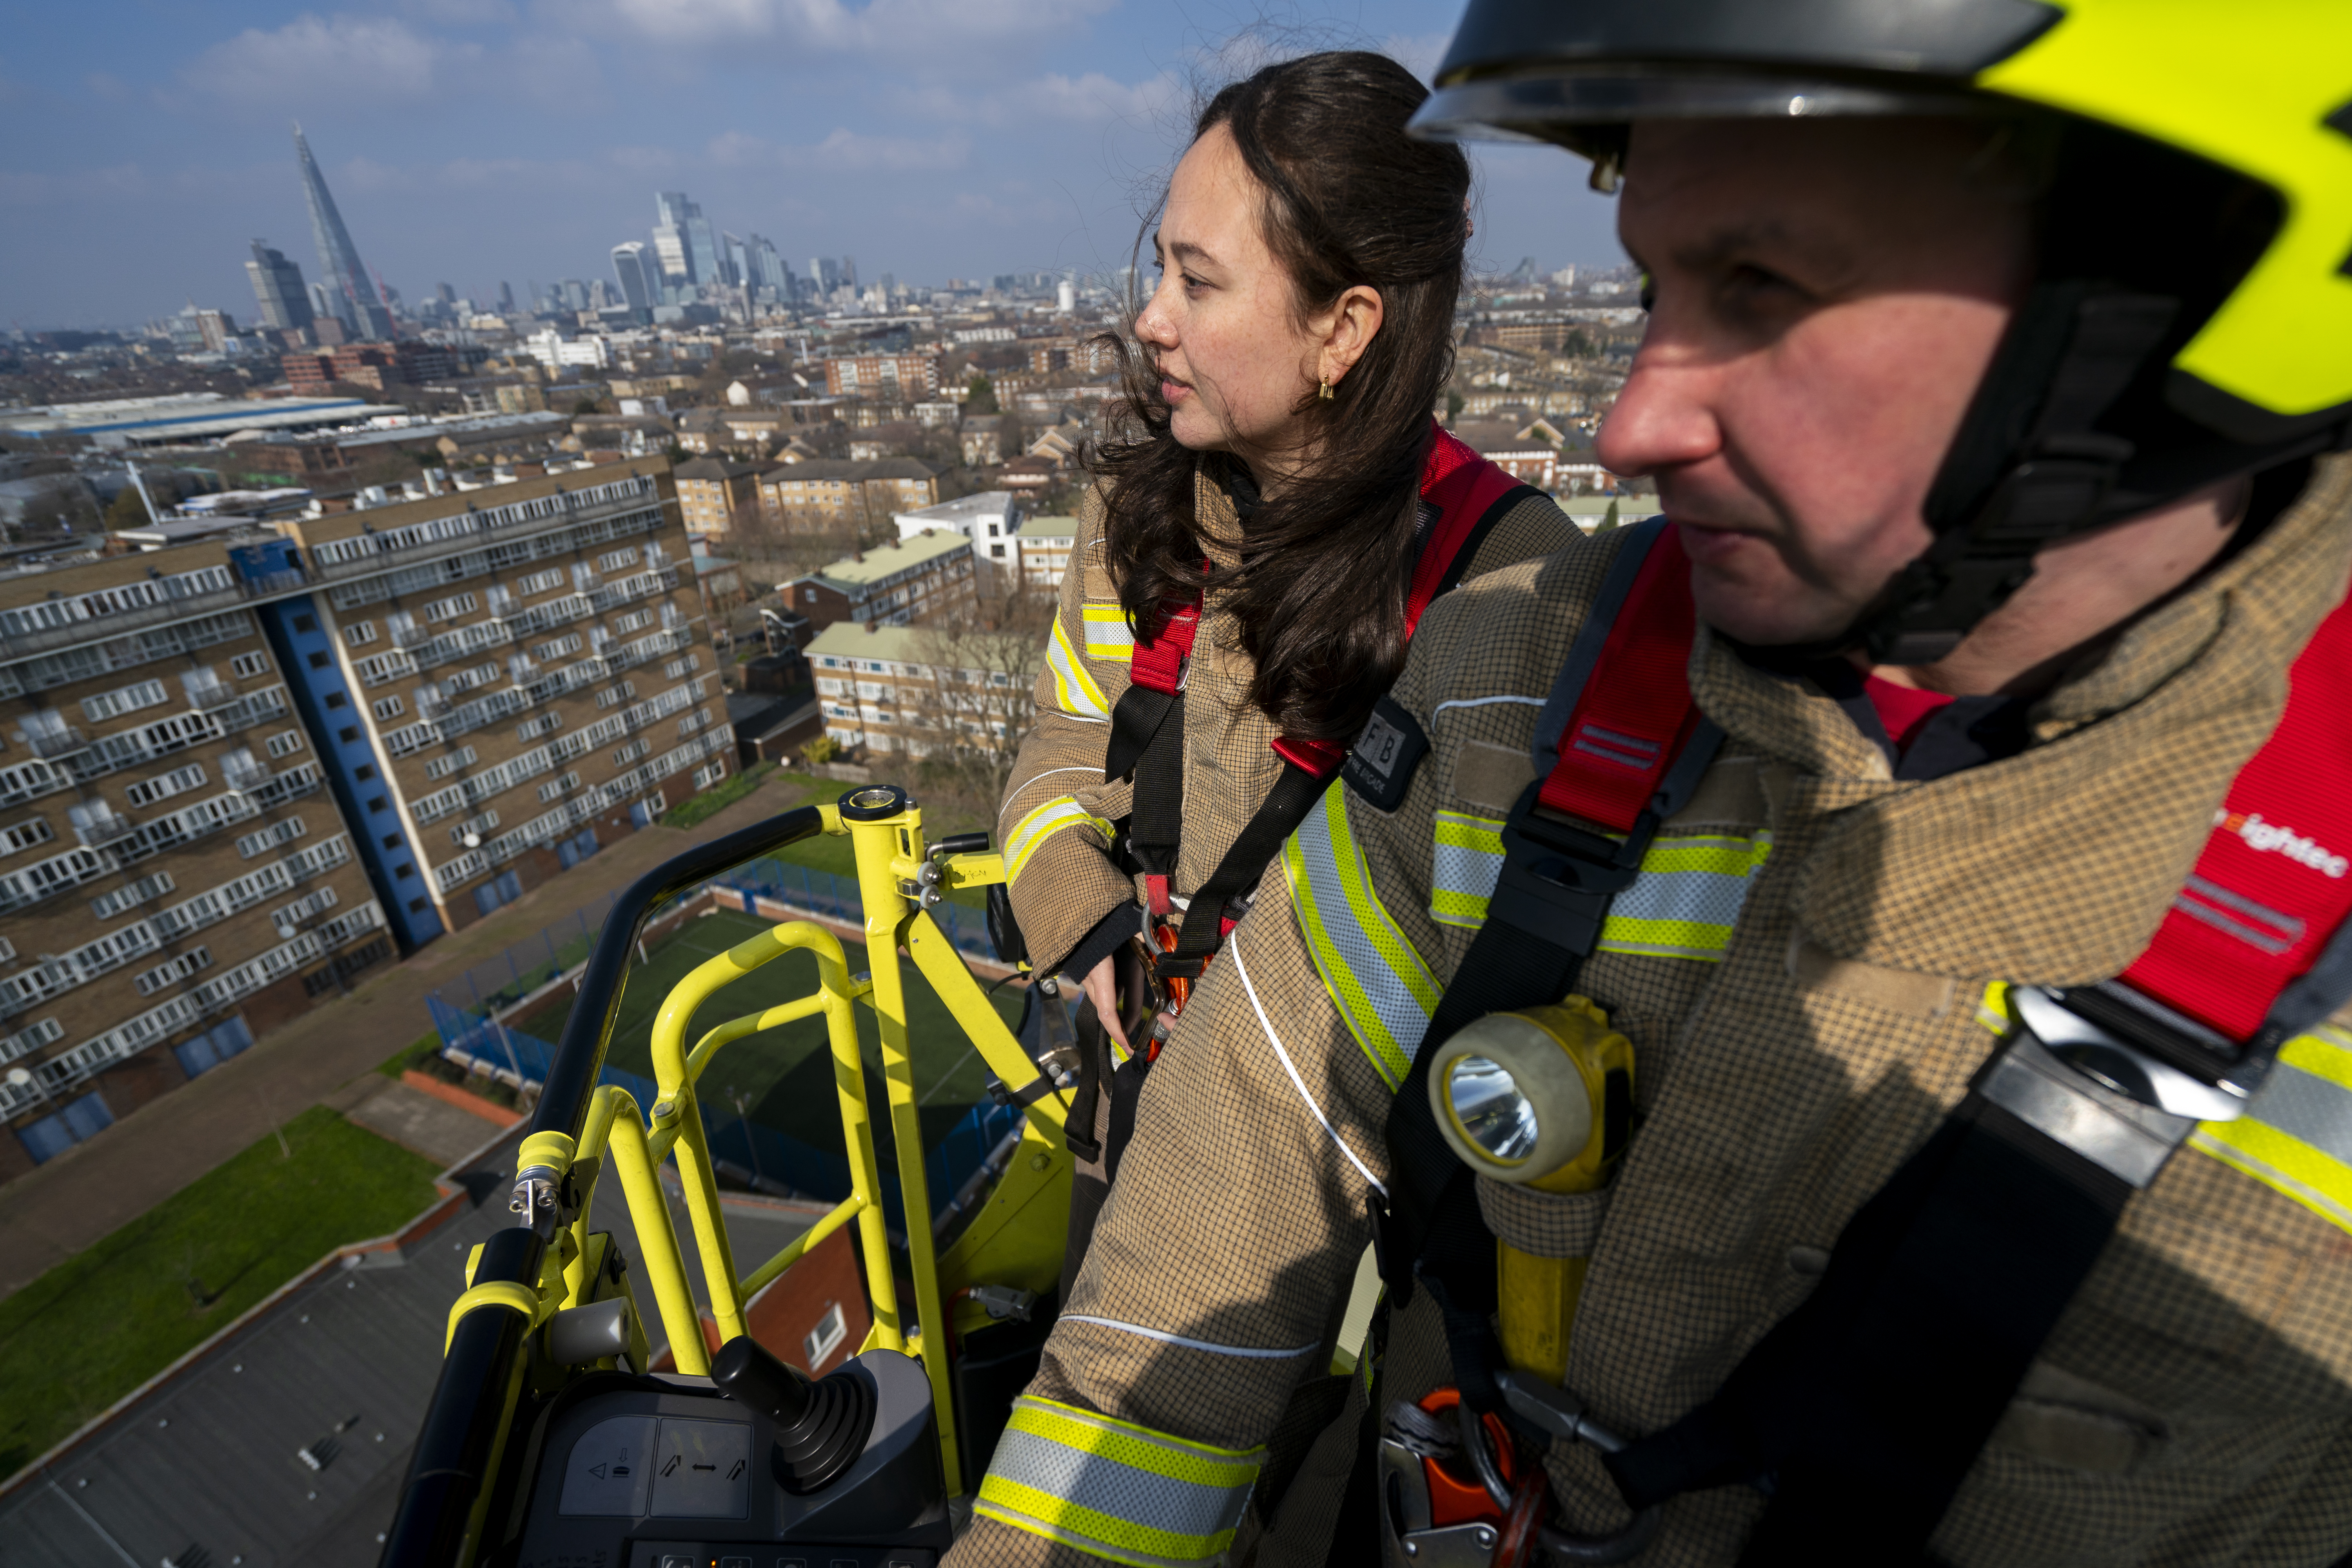 New London Fire Brigade equipment after Grenfell Inquiry recommendations